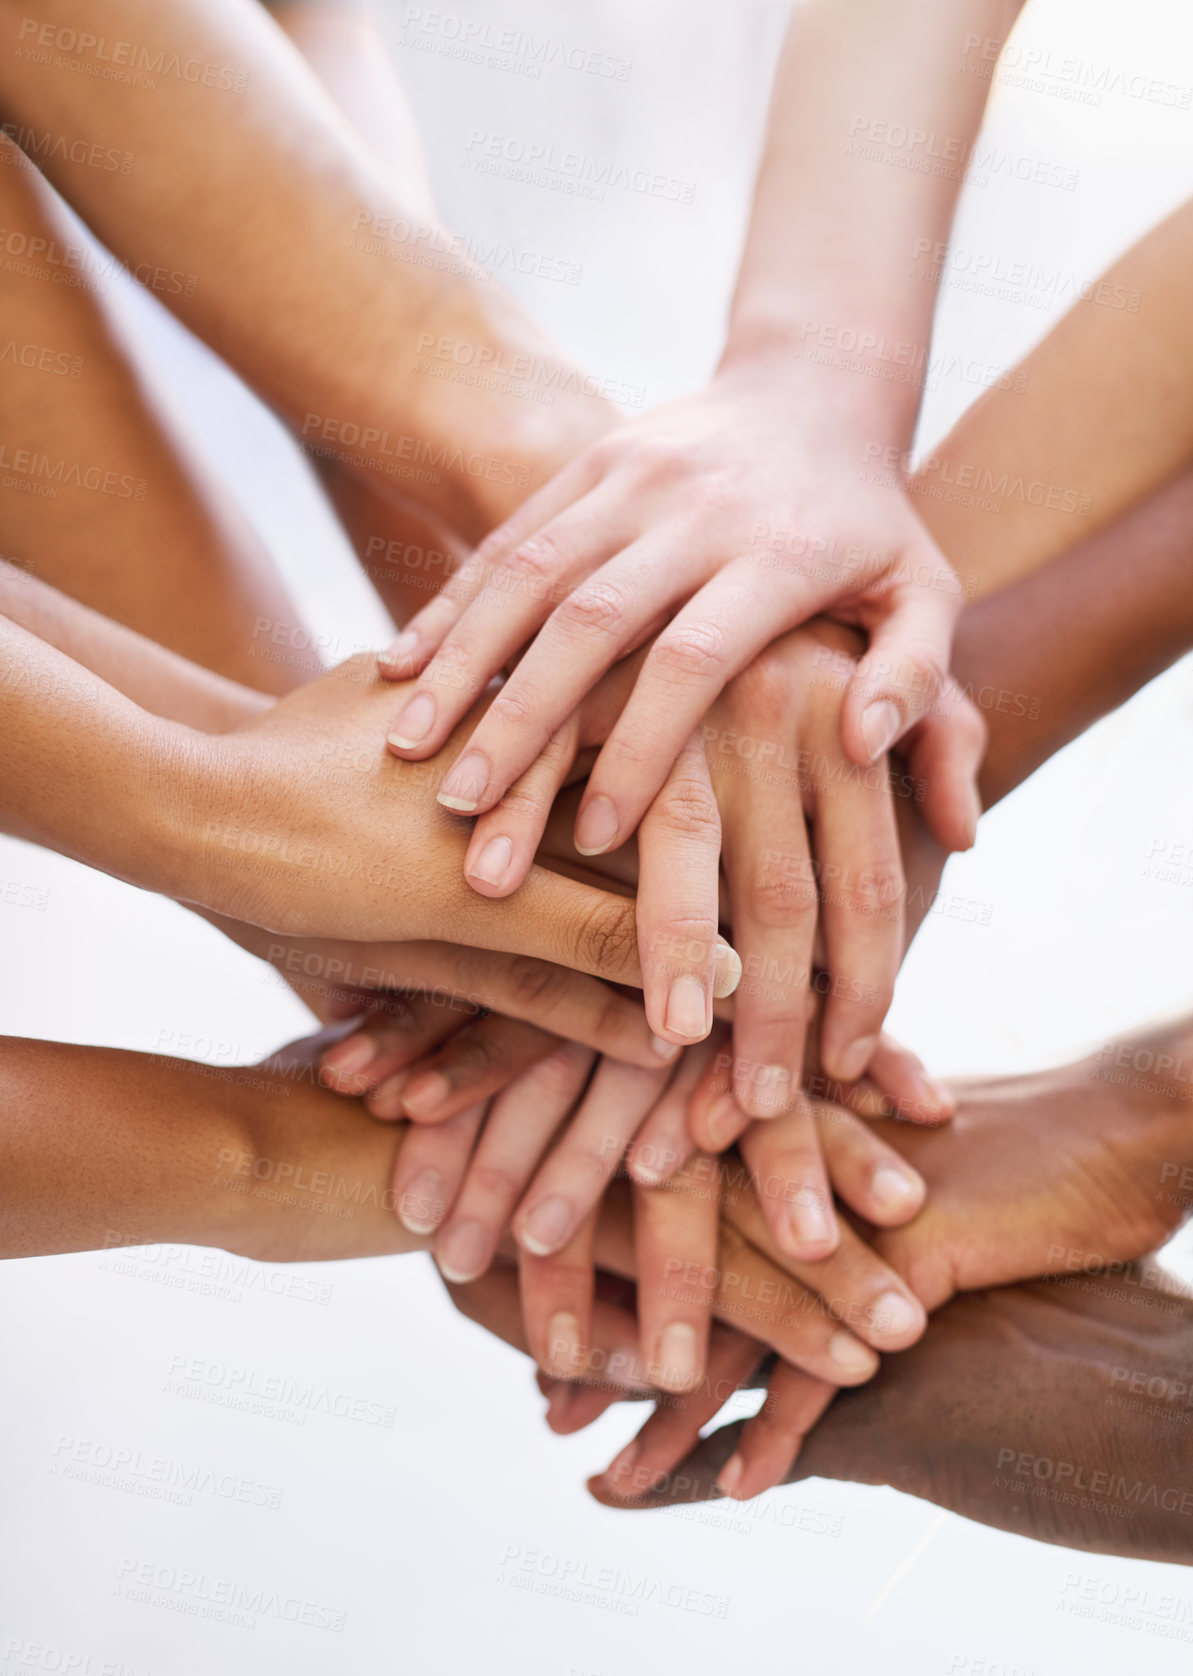 Buy stock photo Shot of a group of people putting their hands together